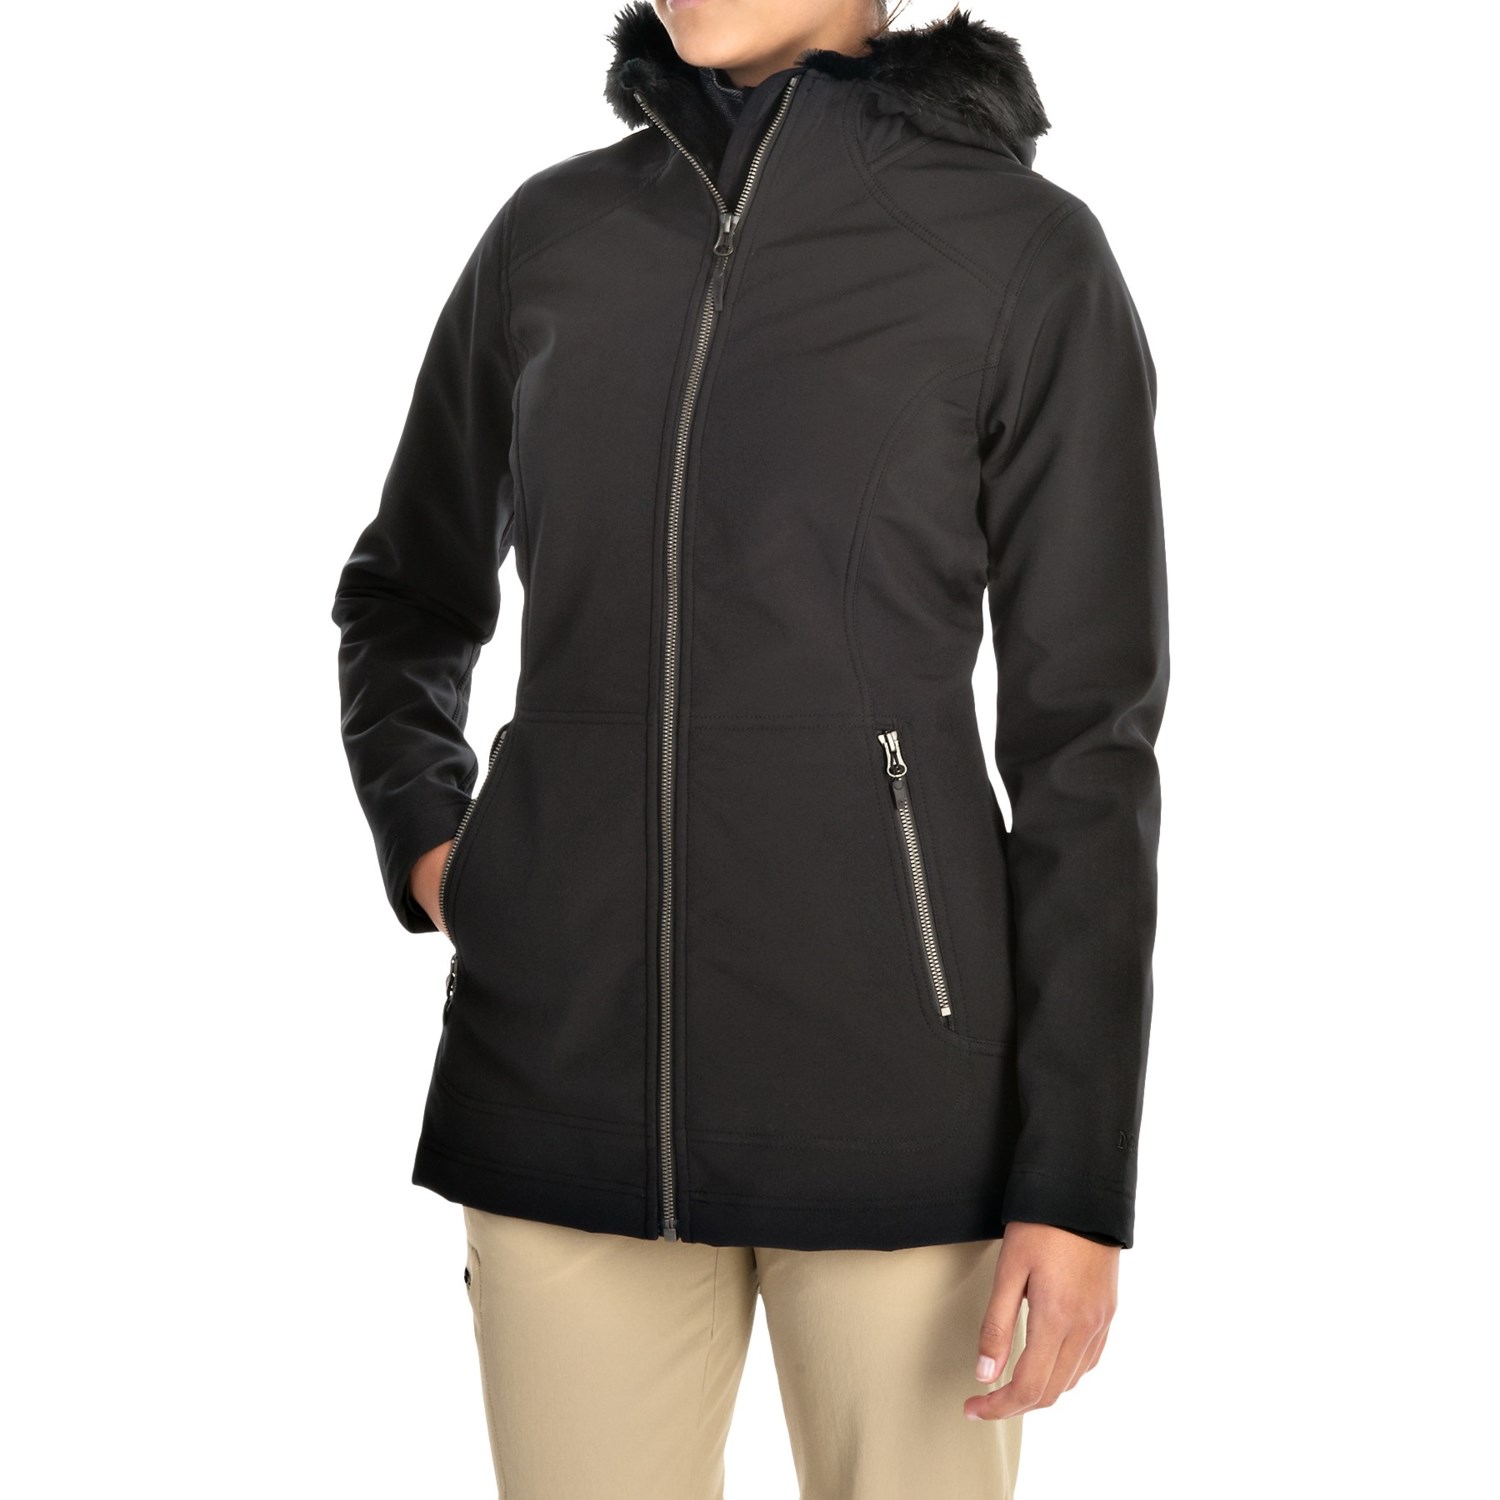 Marmot Tranquility Soft Shell Jacket (For Women)